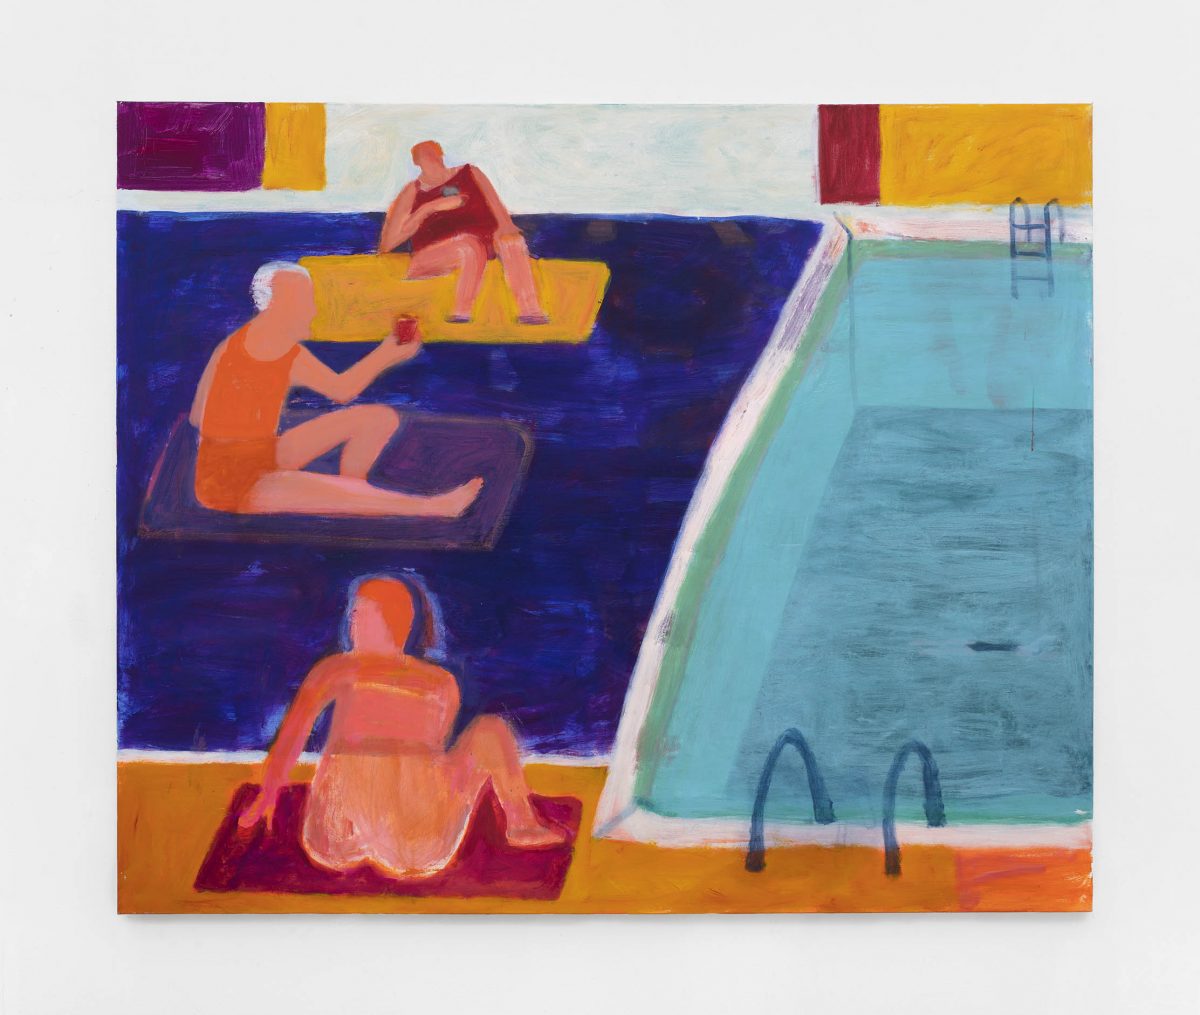 <I>Drinks by the Pool</I>, 2021
</br>
acrylic on canvas</br>
152,4 x 182,8 cm / 60 x 72 in